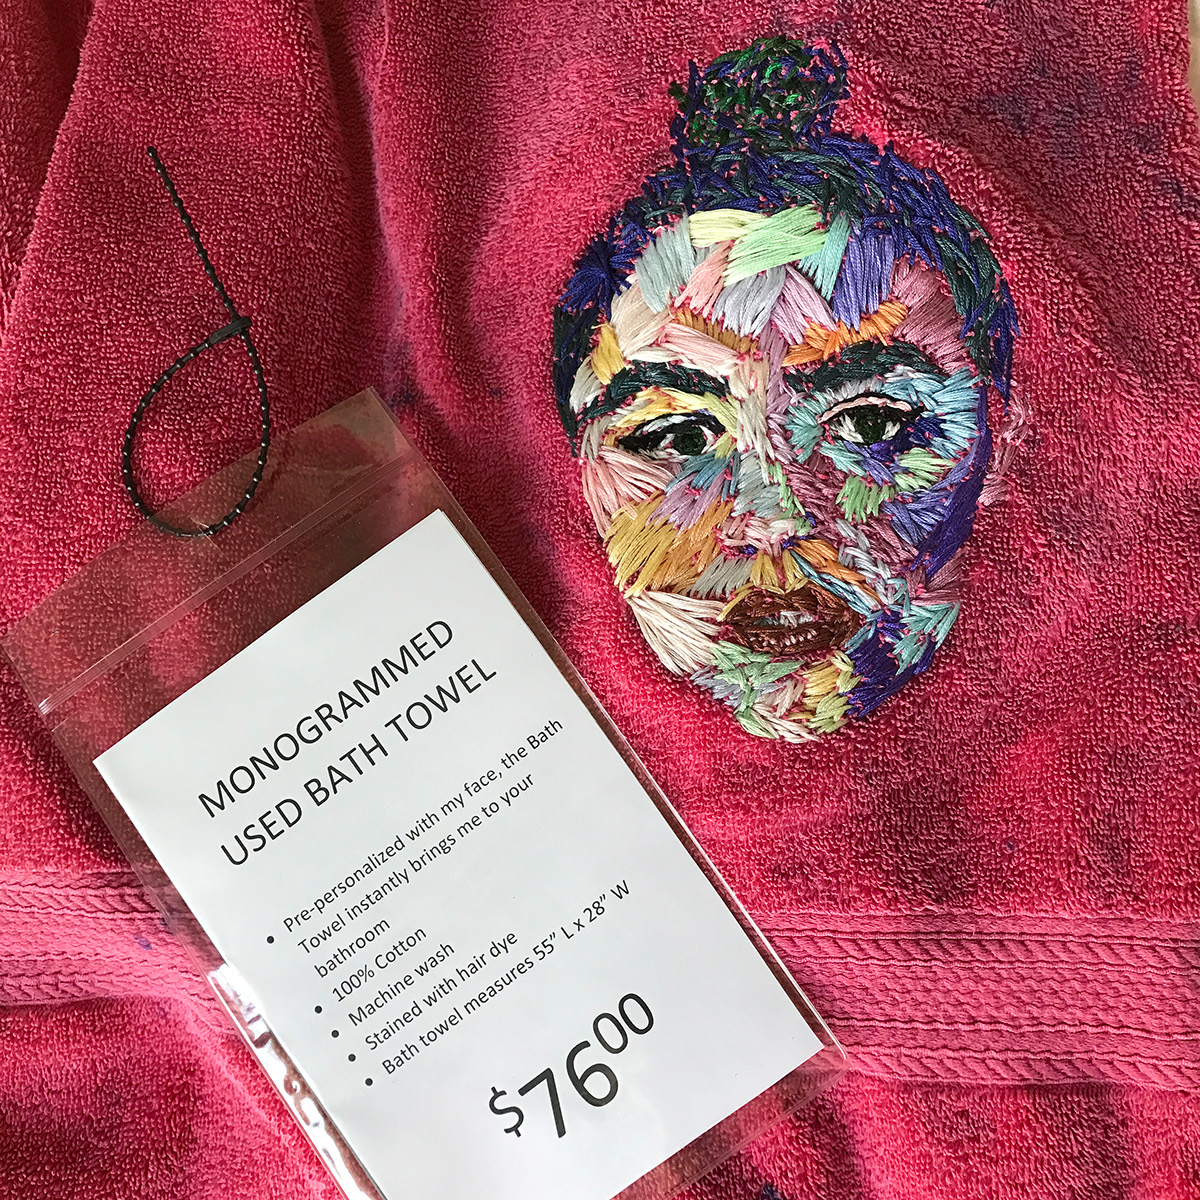 Embroidery installation self love self portraits self portrait fibers Textiles color theory merchandise Display